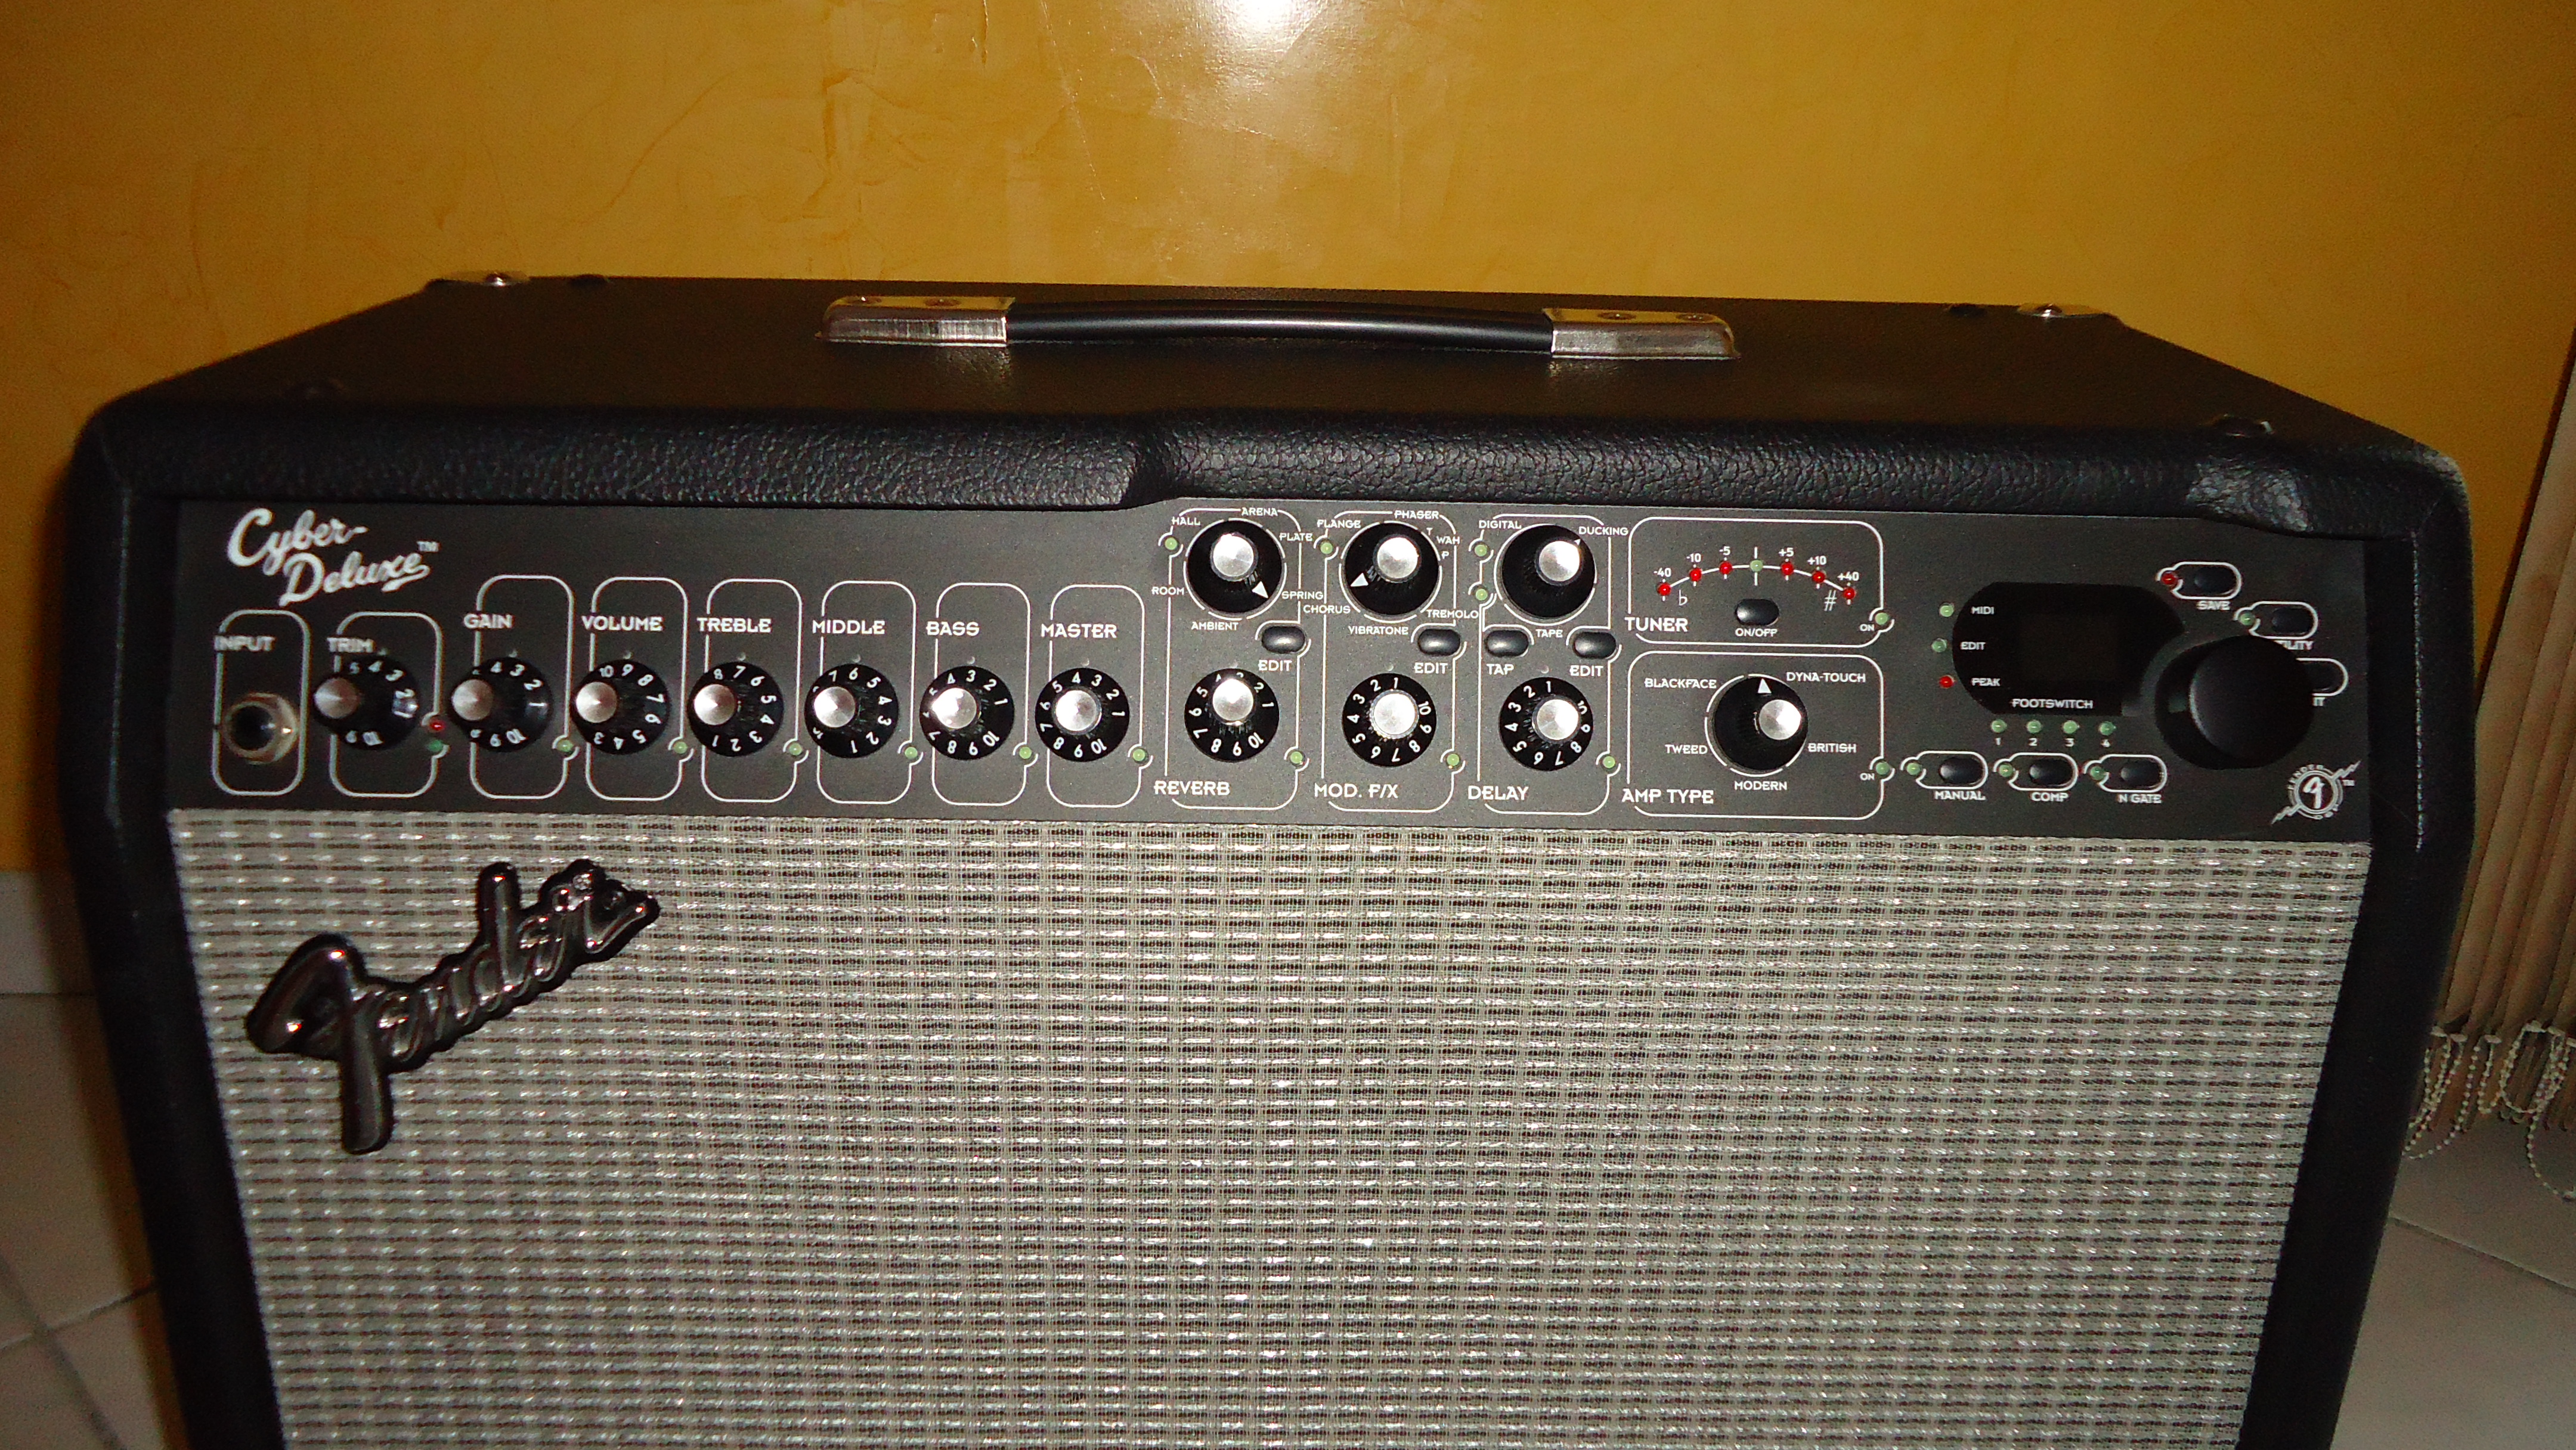 Fender Cyber Deluxe Amp Review